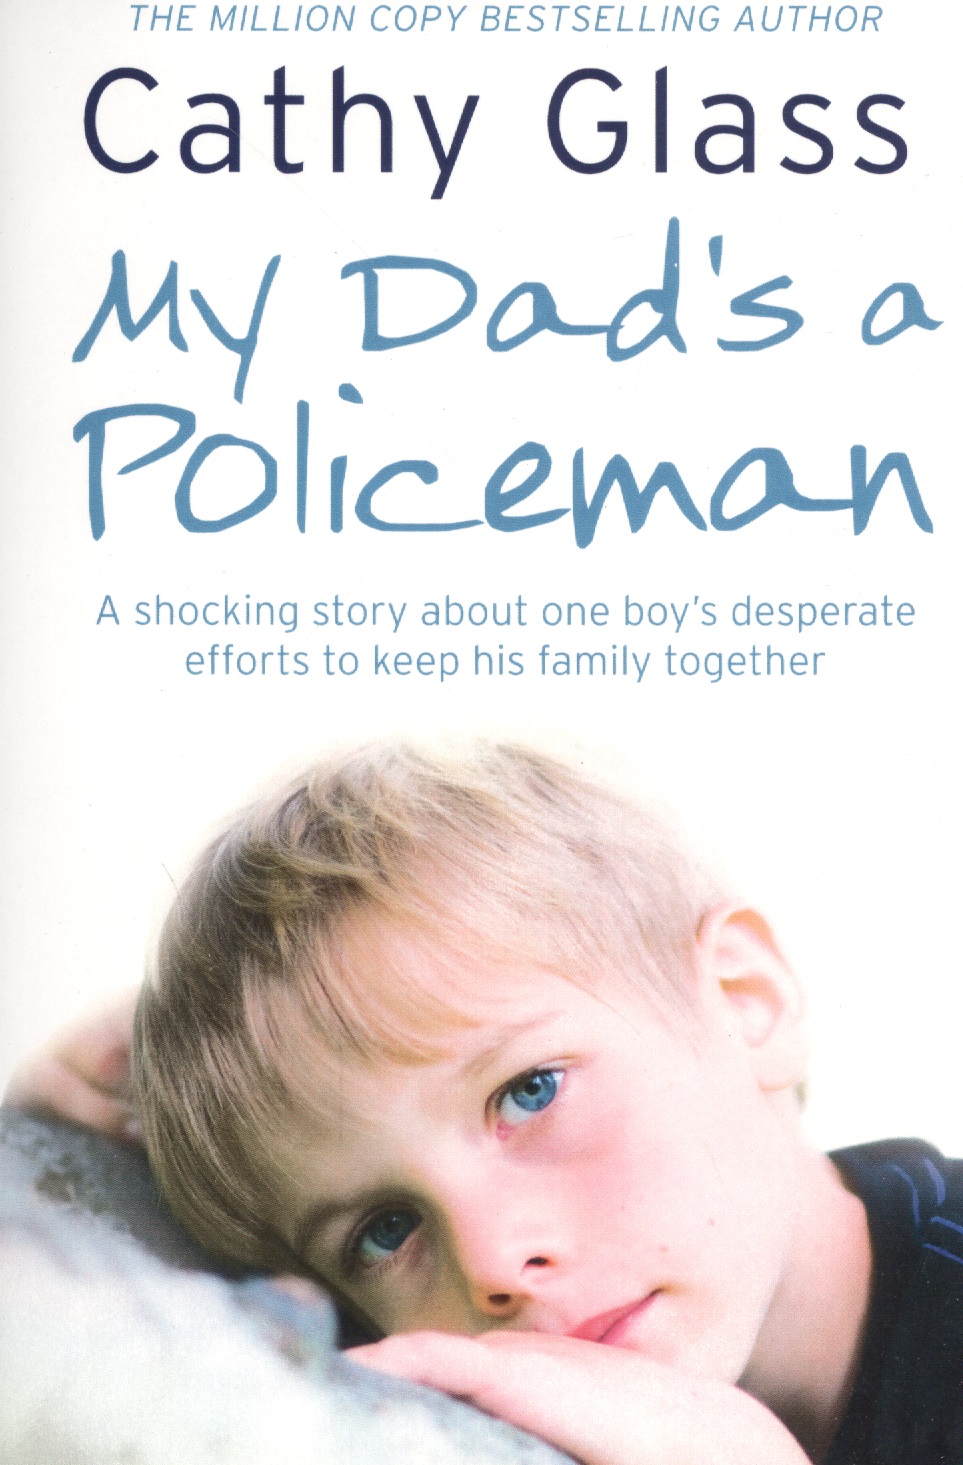 My Dads a Policeman (мQuickReads) Glass гласс кэти my dads a policeman мquickreads glass